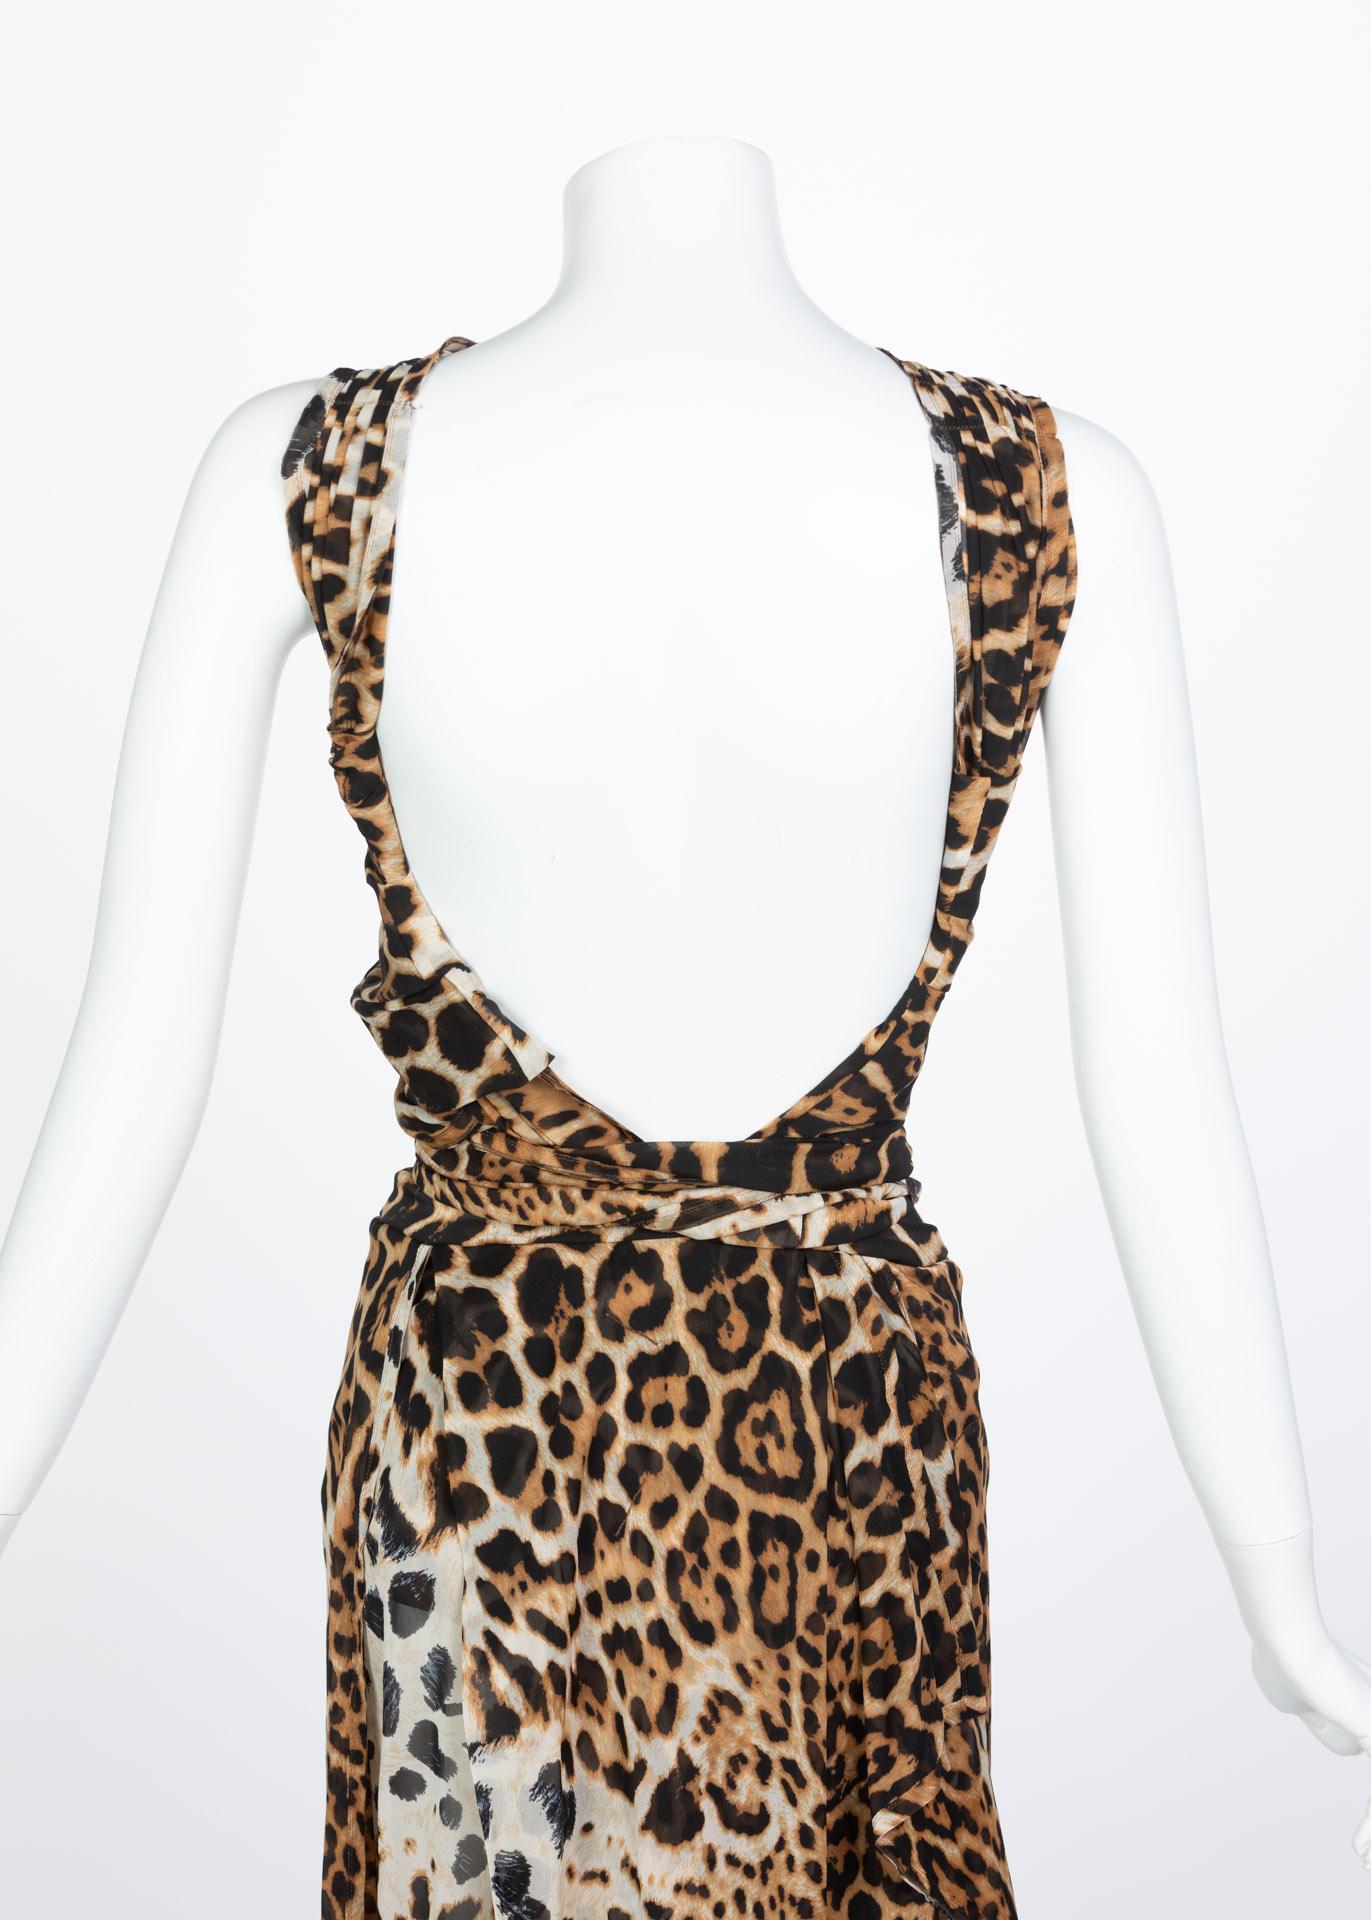  Yves Saint Laurent by Tom Ford Silk Leopard Cut Out Maxi Dress YSL, 2002  4